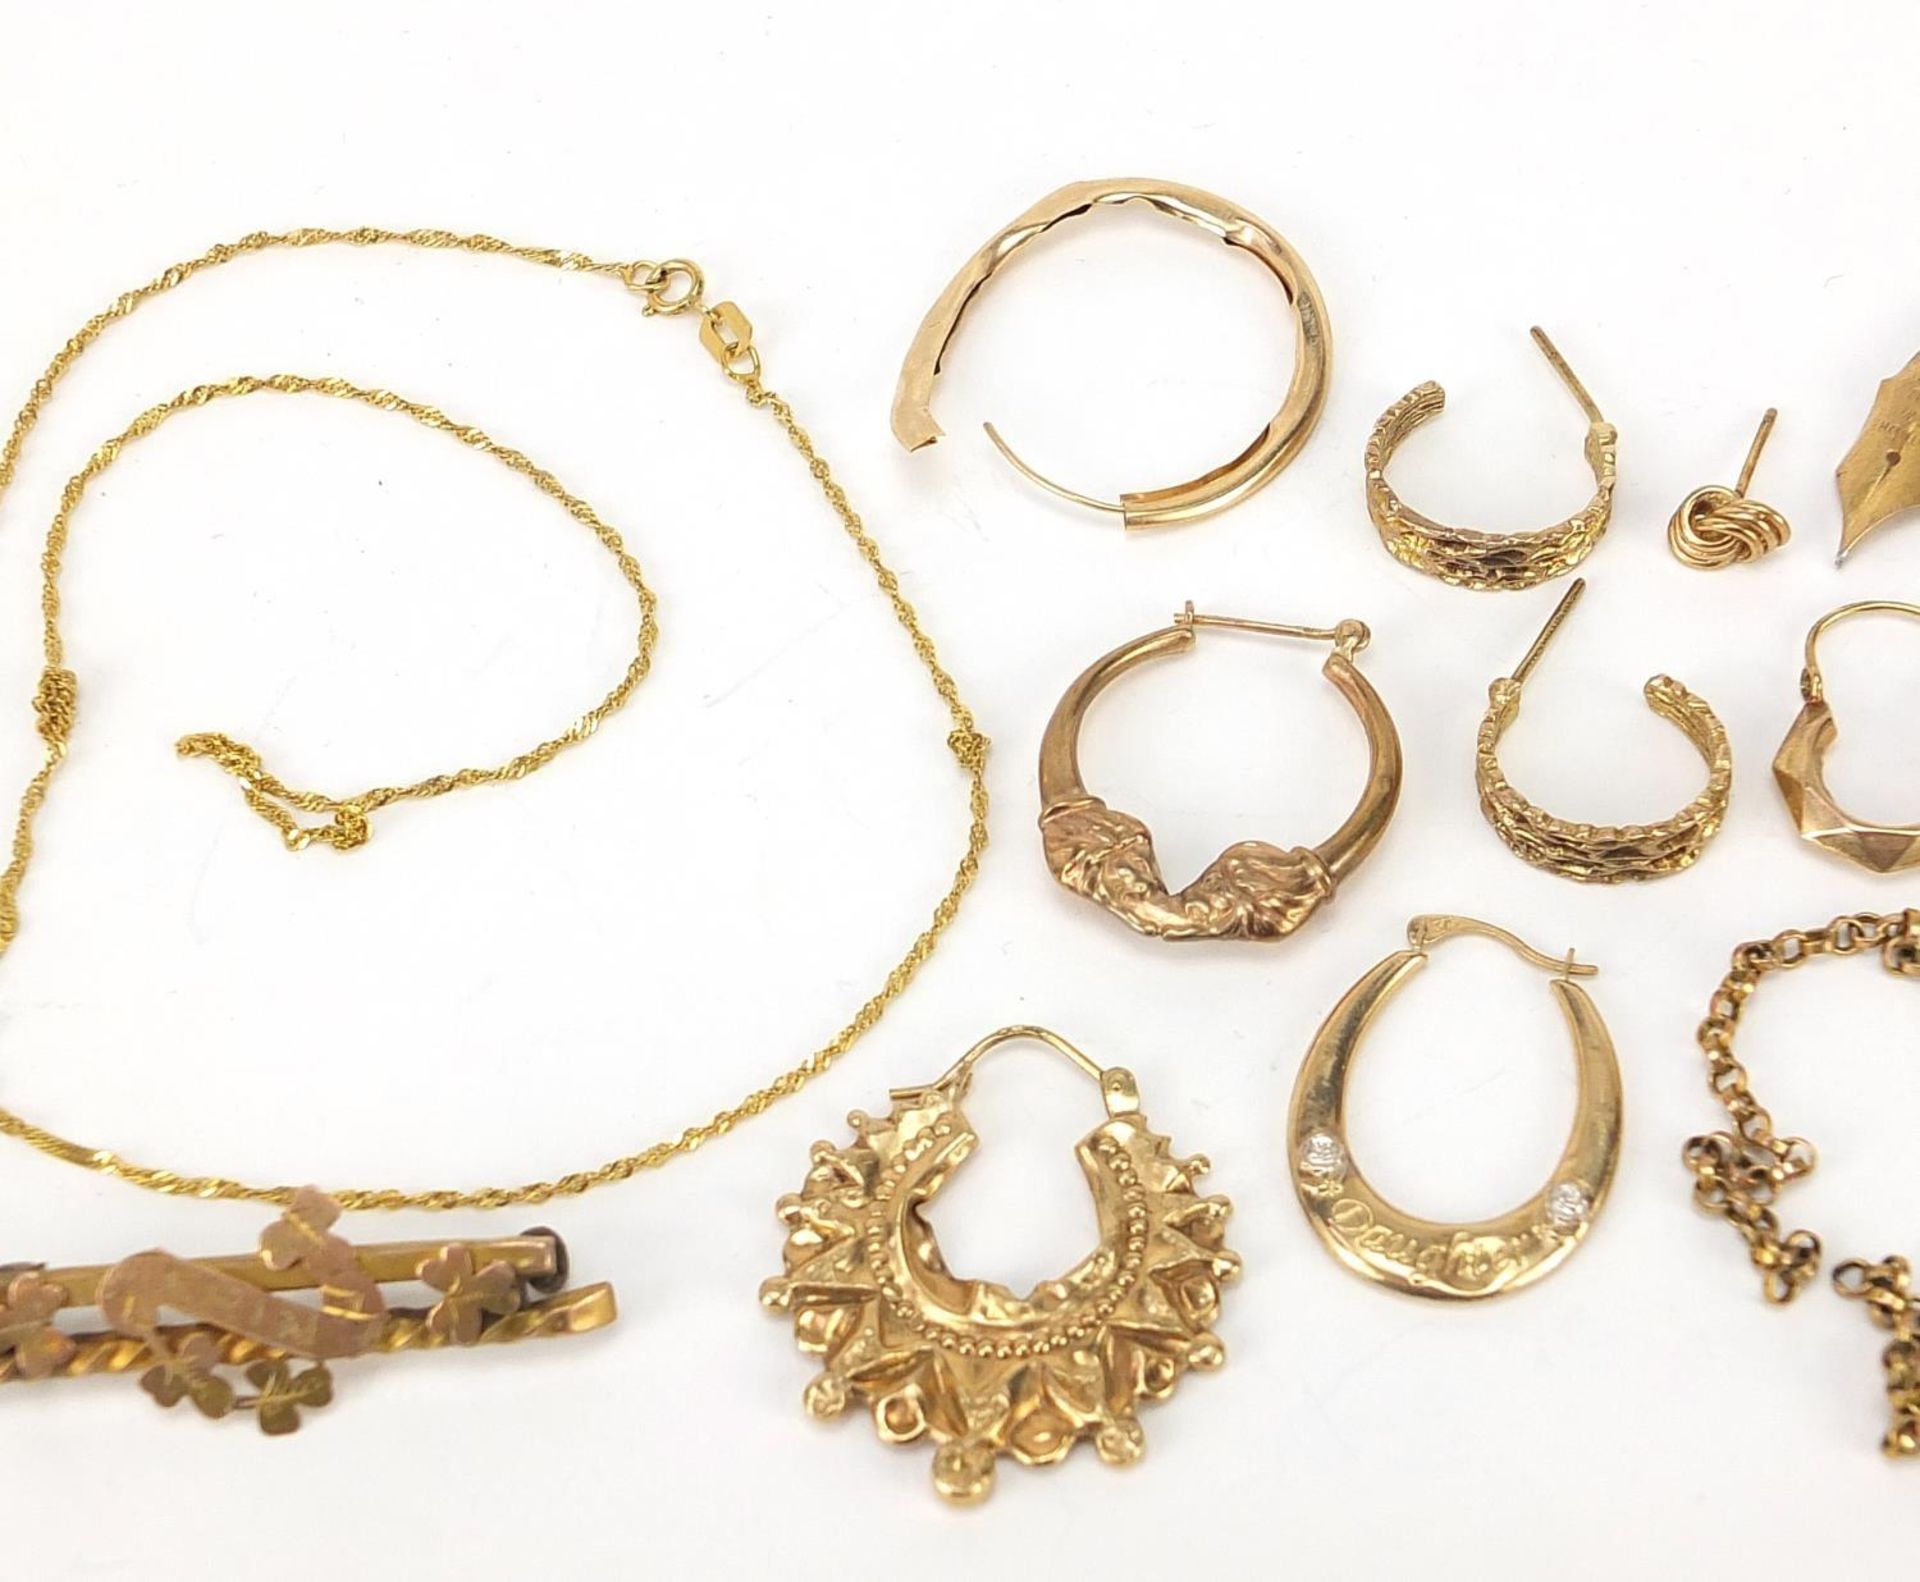 9ct gold jewellery including earrings, necklaces, Victorian bar brooch and 14ct gold fountain pen - Image 3 of 9